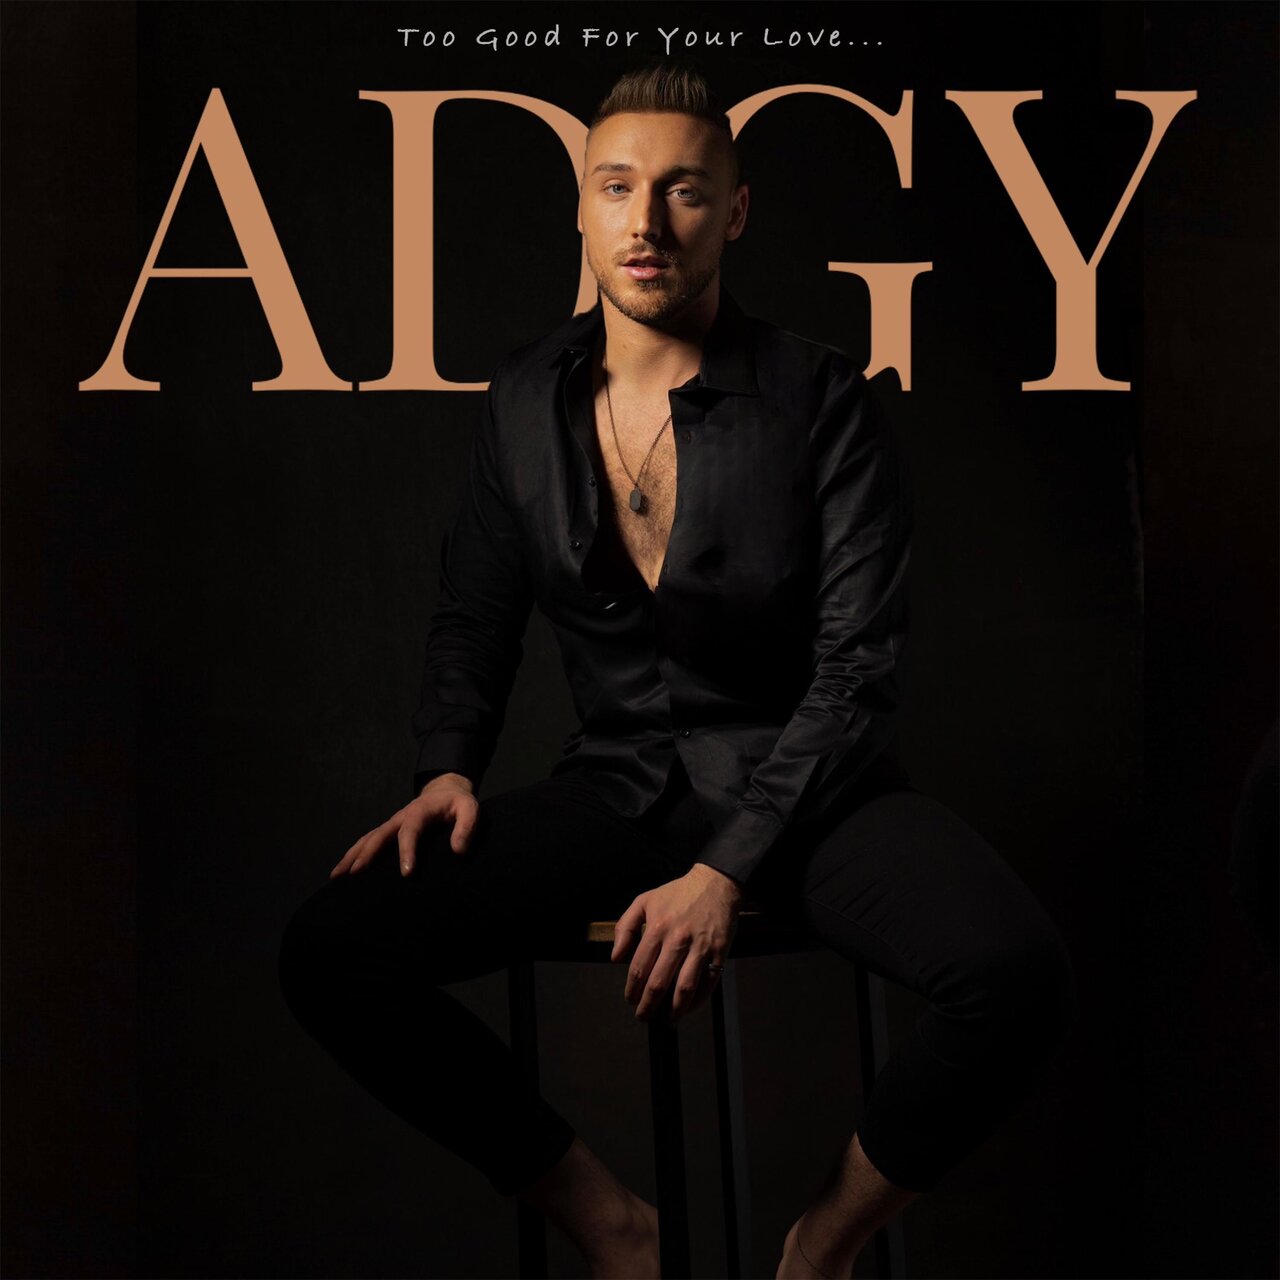 ADGY — Too Good For Your Love cover artwork